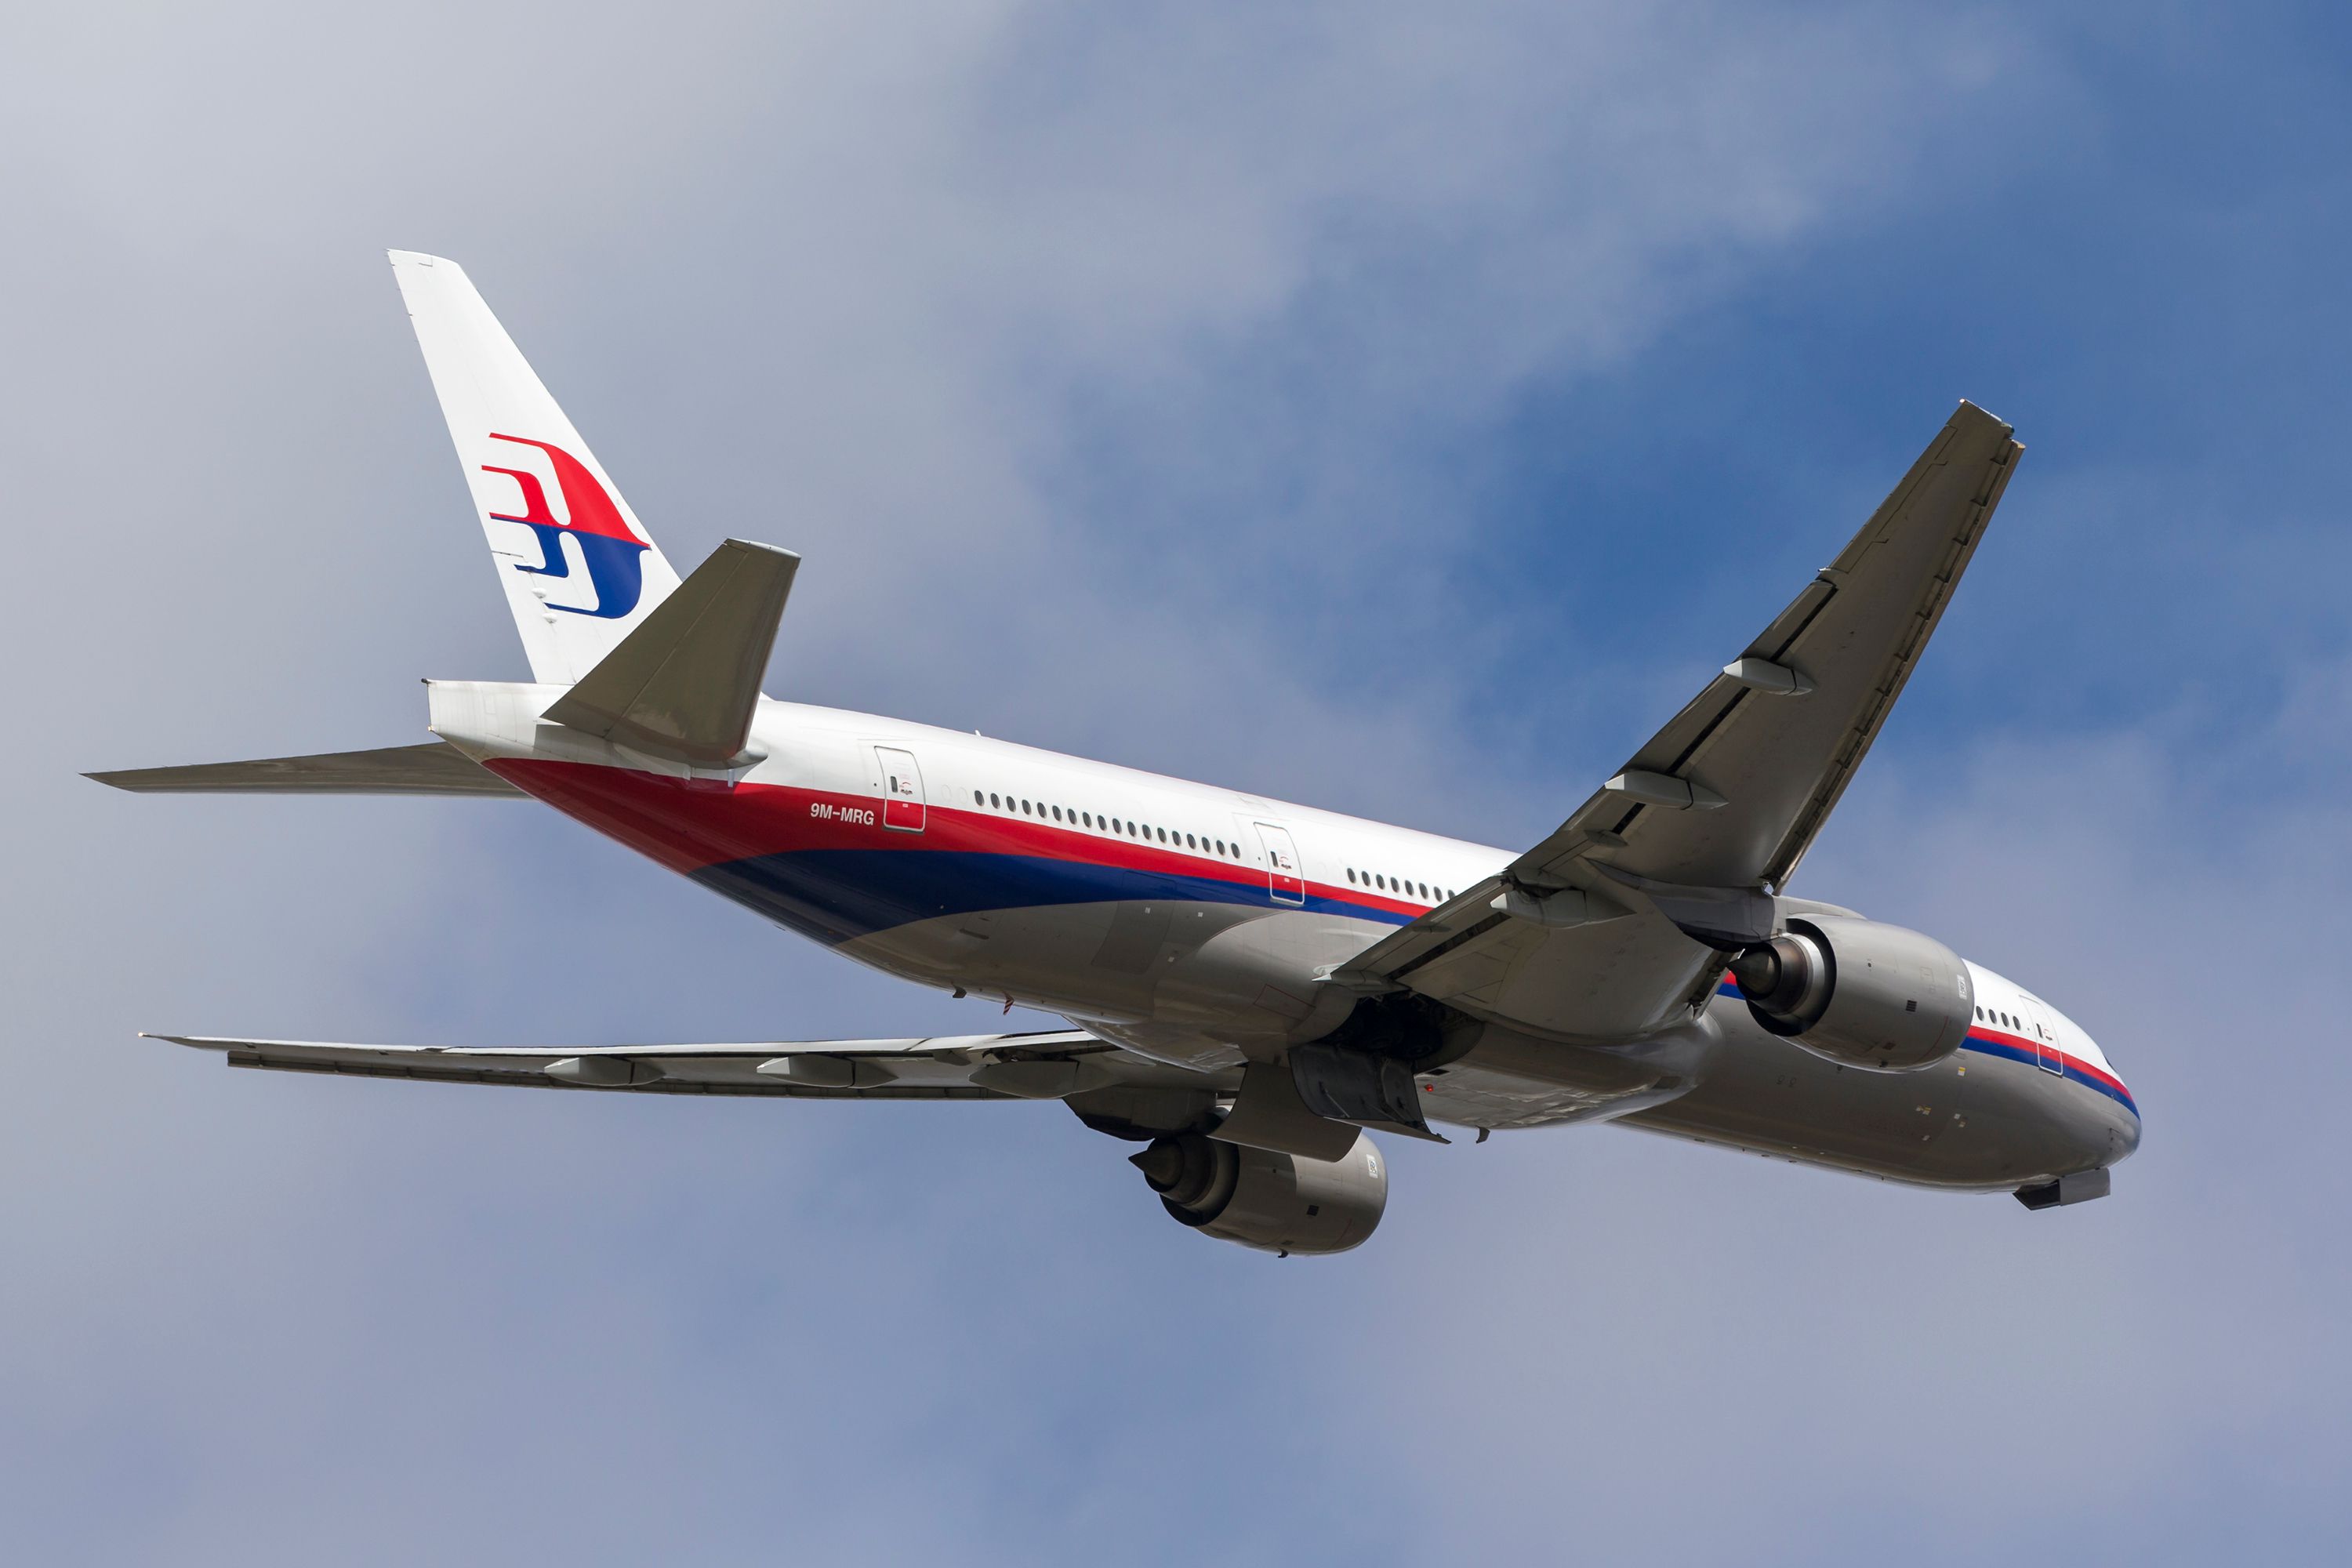 Malaysia Airlines Boeing 777 (9M-MRG) departing Melbourne International Airport.